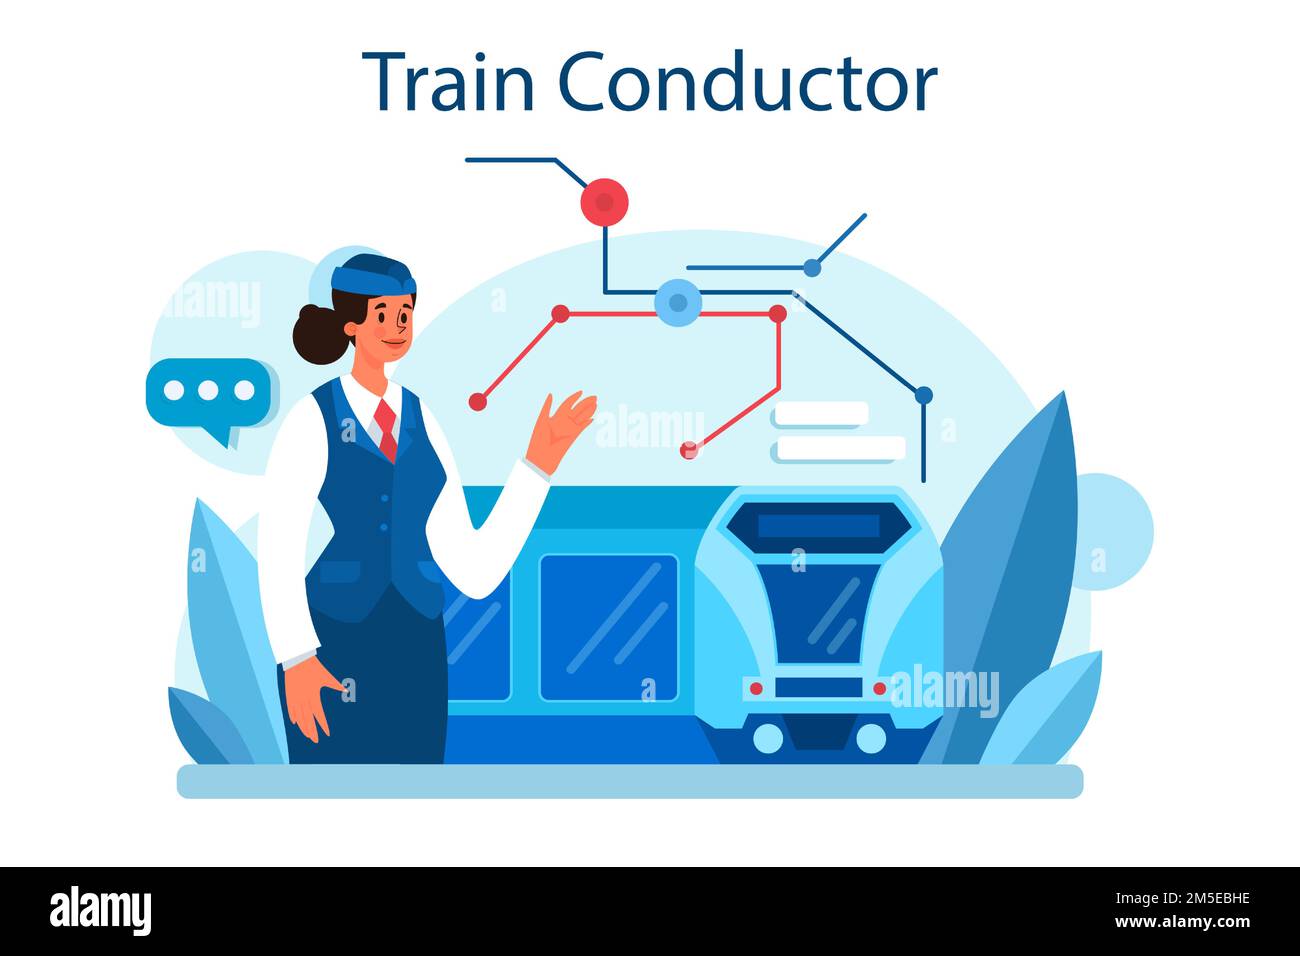 Train conductor. Railway worker in uniform on duty. Train attendant help passenger in journey. Traveling by train. Idea of professional occupation and Stock Vector